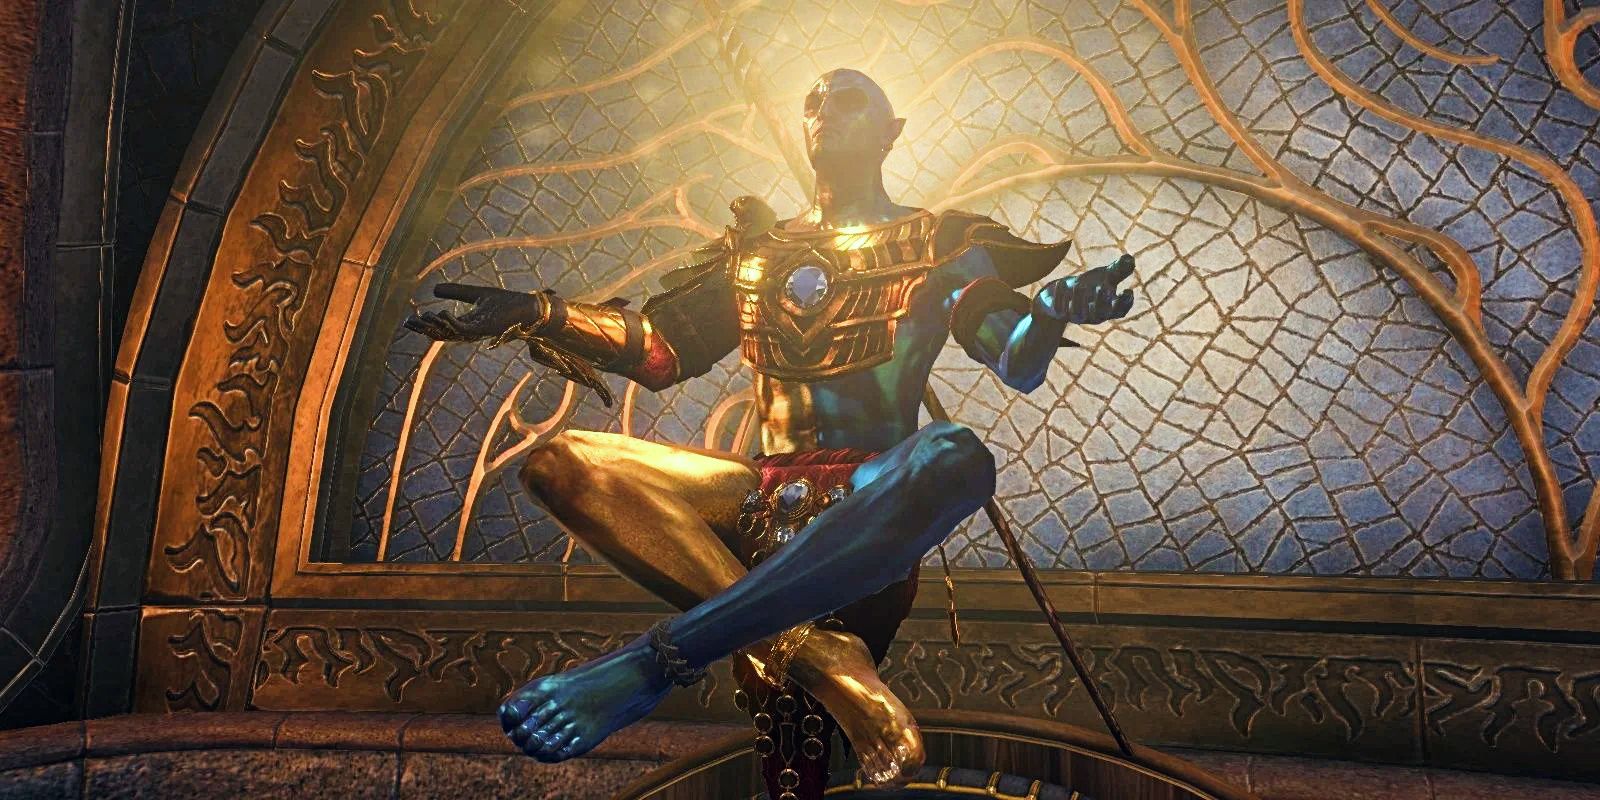 Vivec floating in the air with his legs crossed in Skyrim's Ghosts of the Tribunal quest